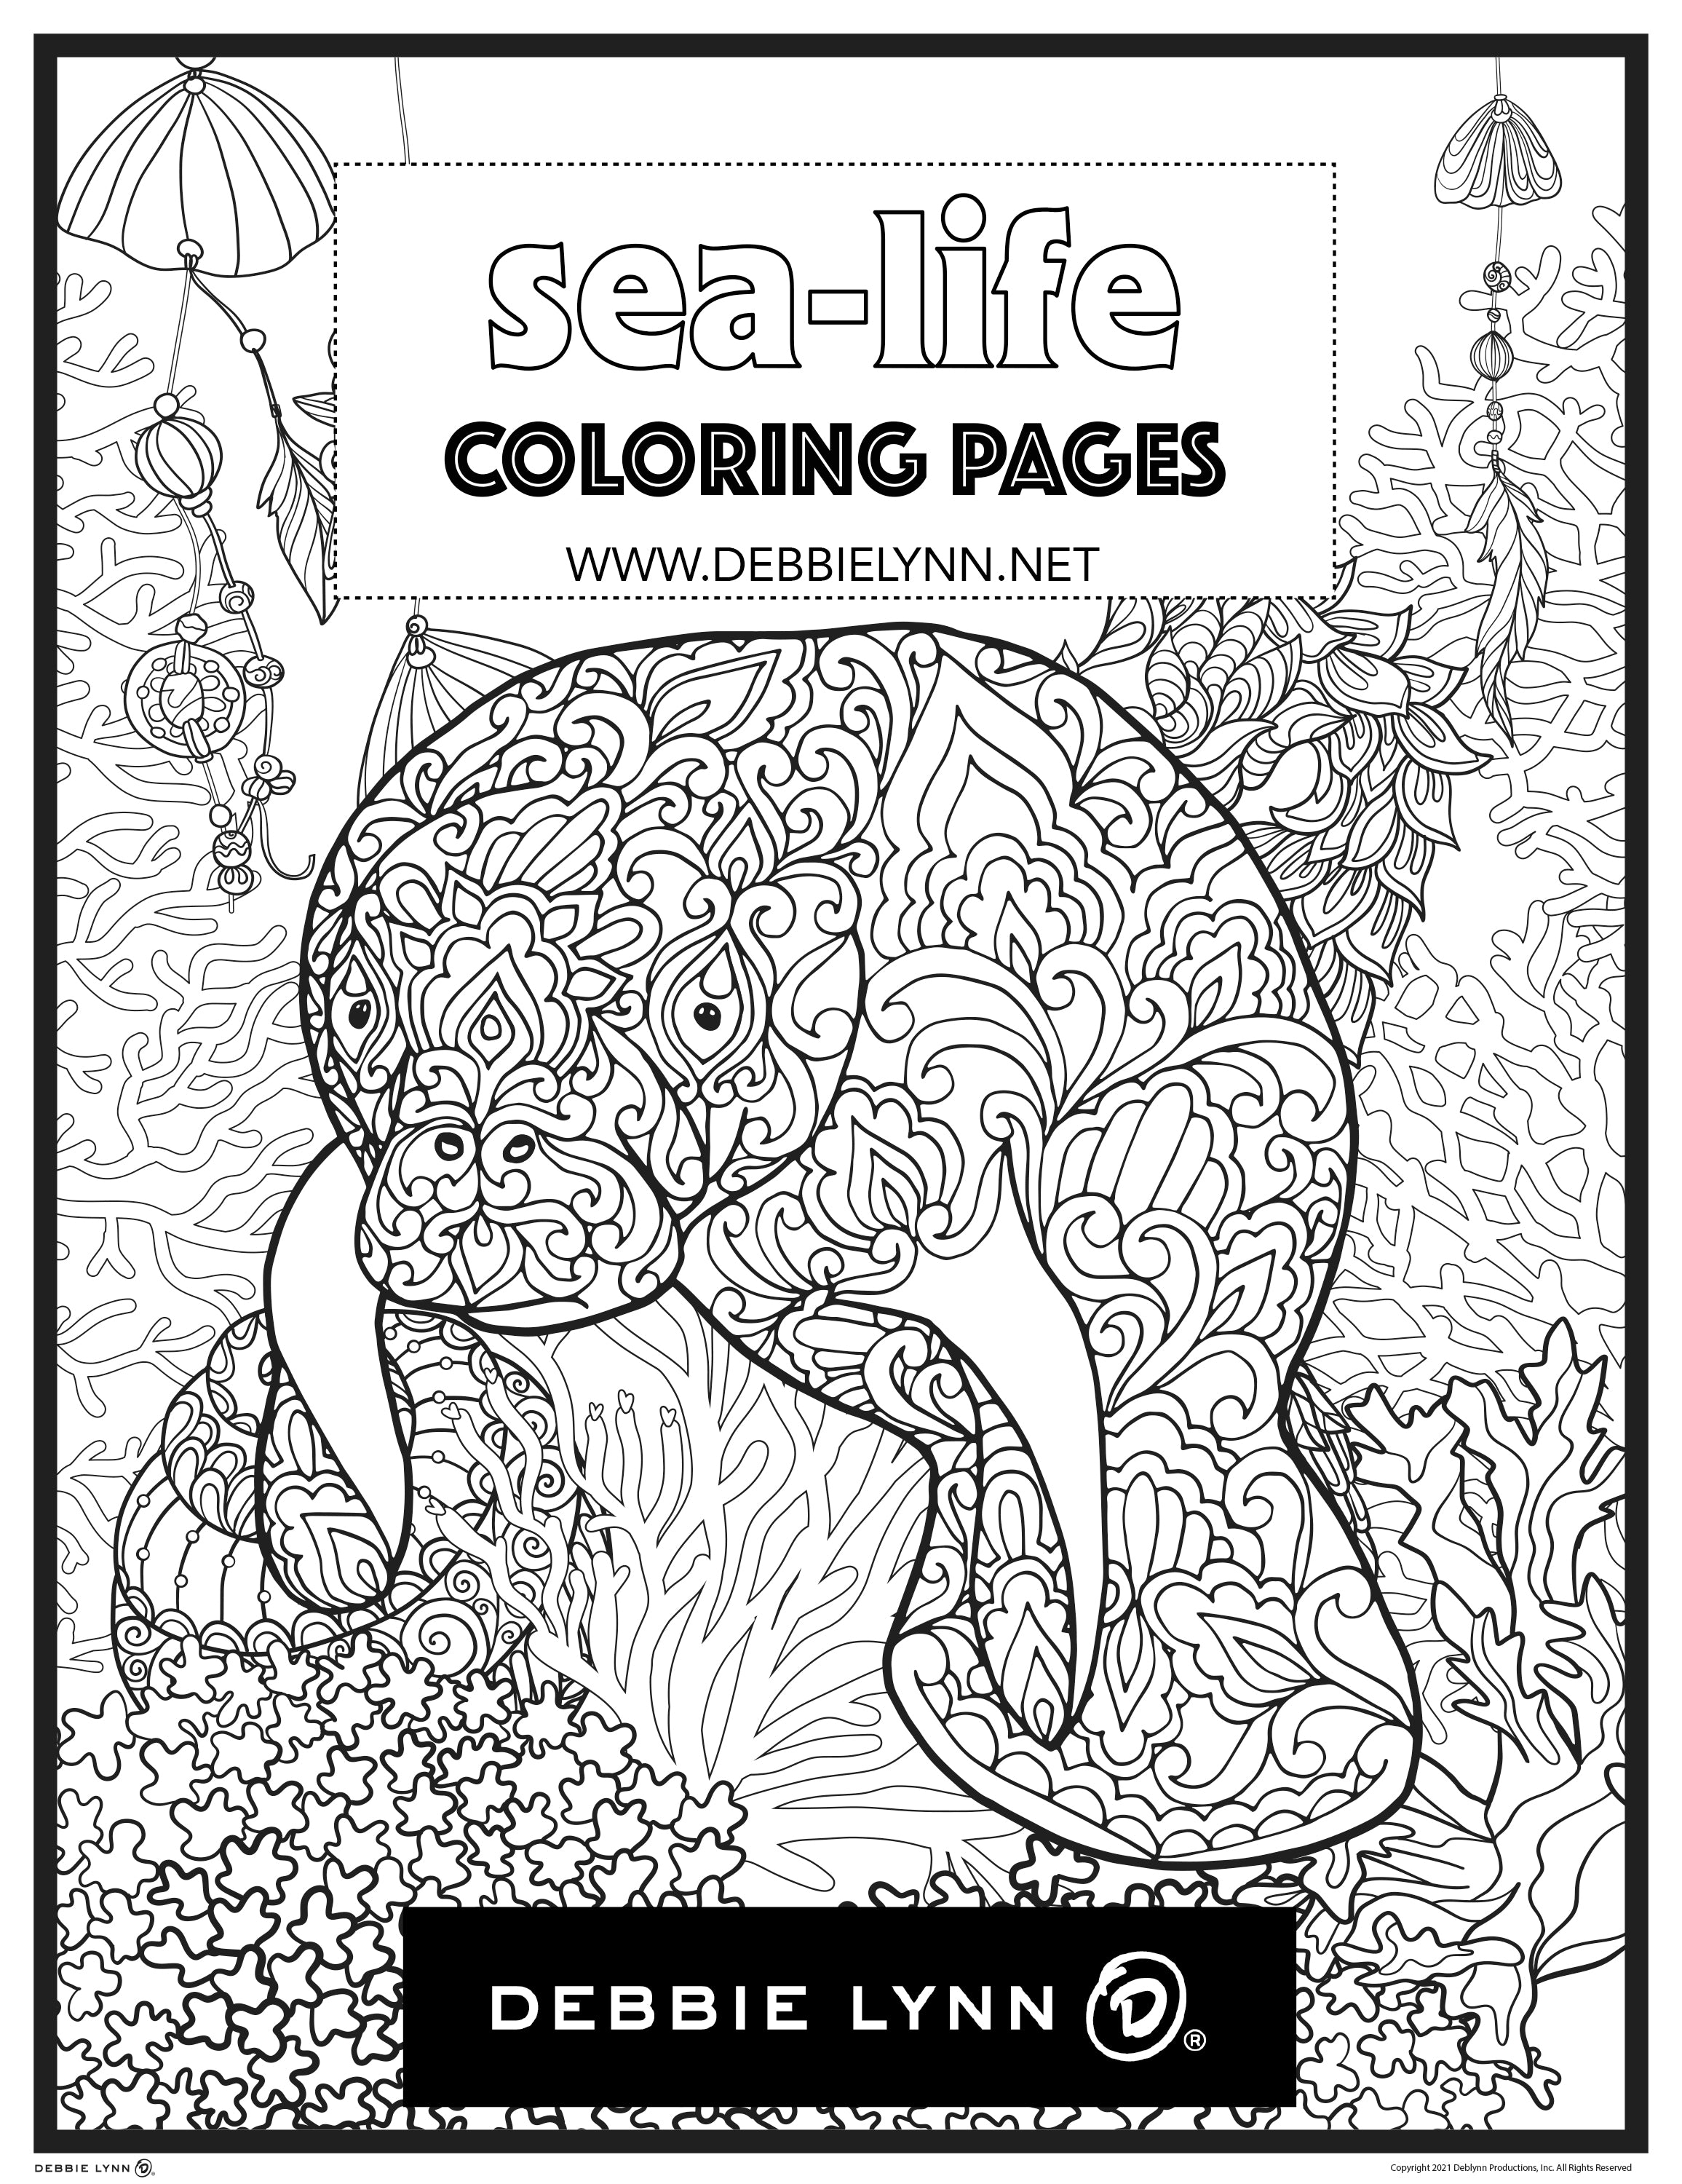 Sea Life Coloring Book for Teens and Young Adults - Create Your Own Doodle Cover (8x10 Softcover Personalized Coloring Book / Activity Book) [Book]